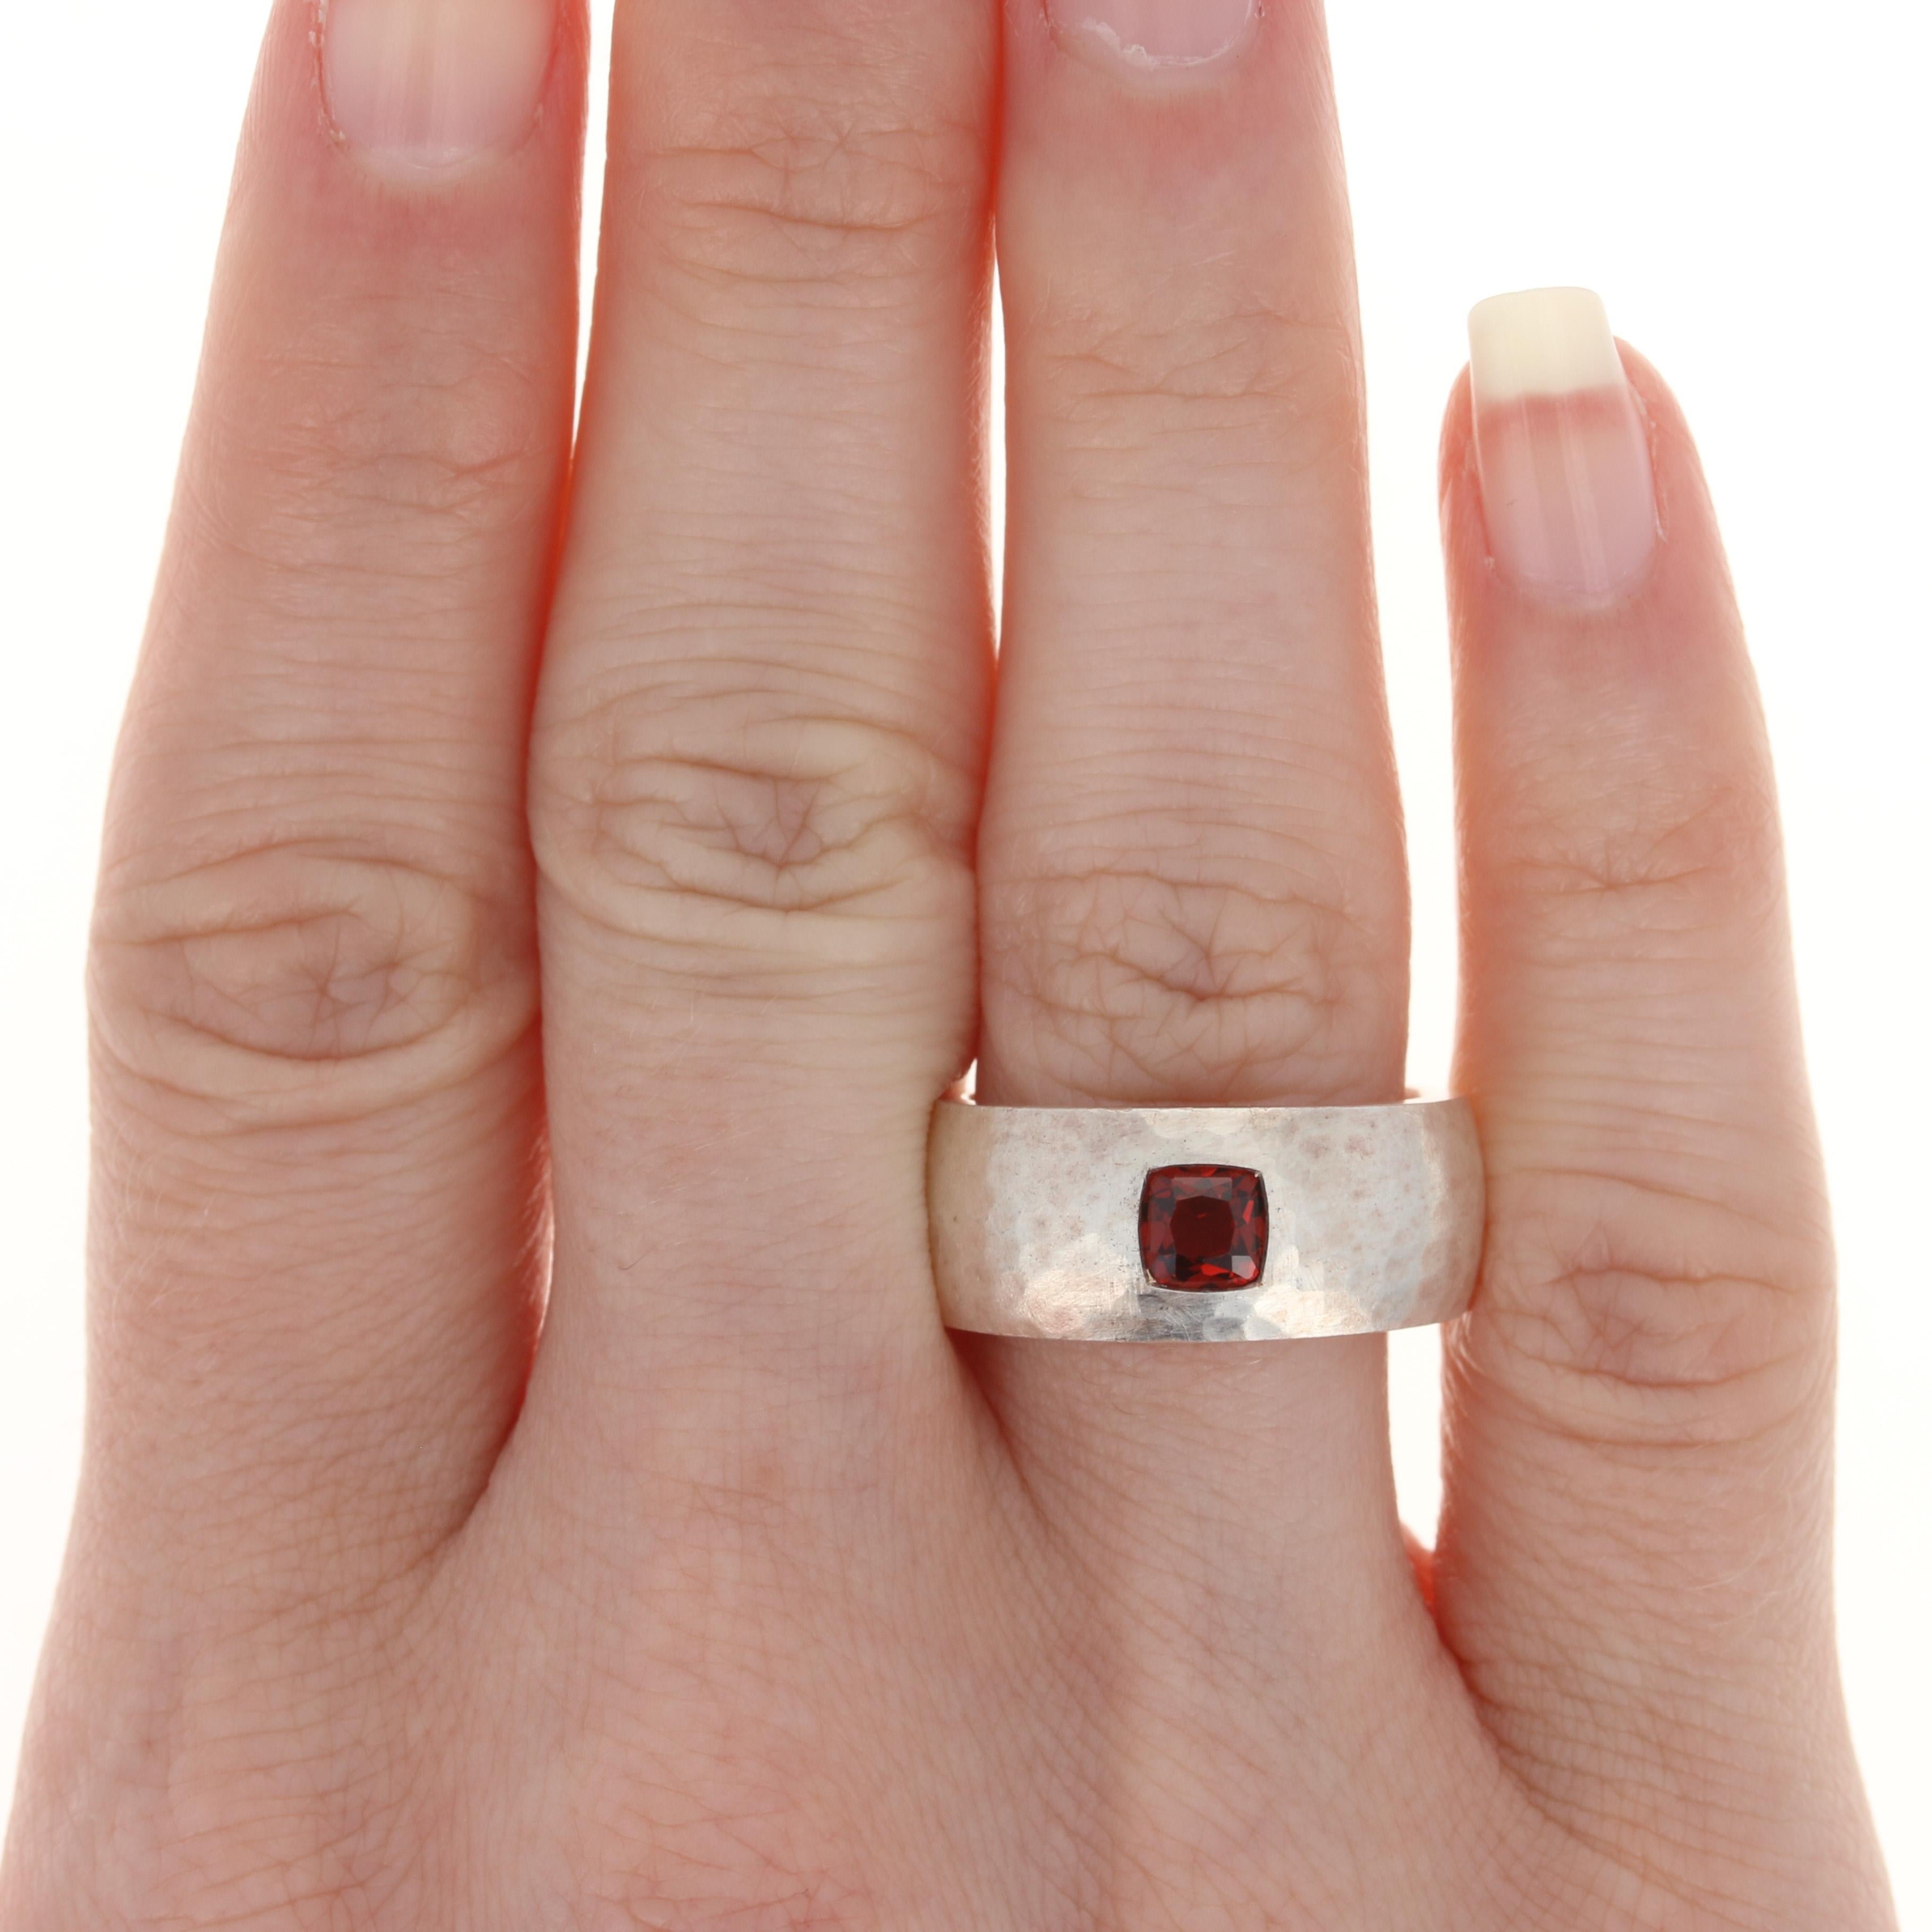 This ring retails at $350
This ring is a size 7 1/4. Please contact for additional sizing options.
Metal Content: Sterling Silver
Finish: Brush
Stone:  Garnet
Face Height (north to south): 11/32